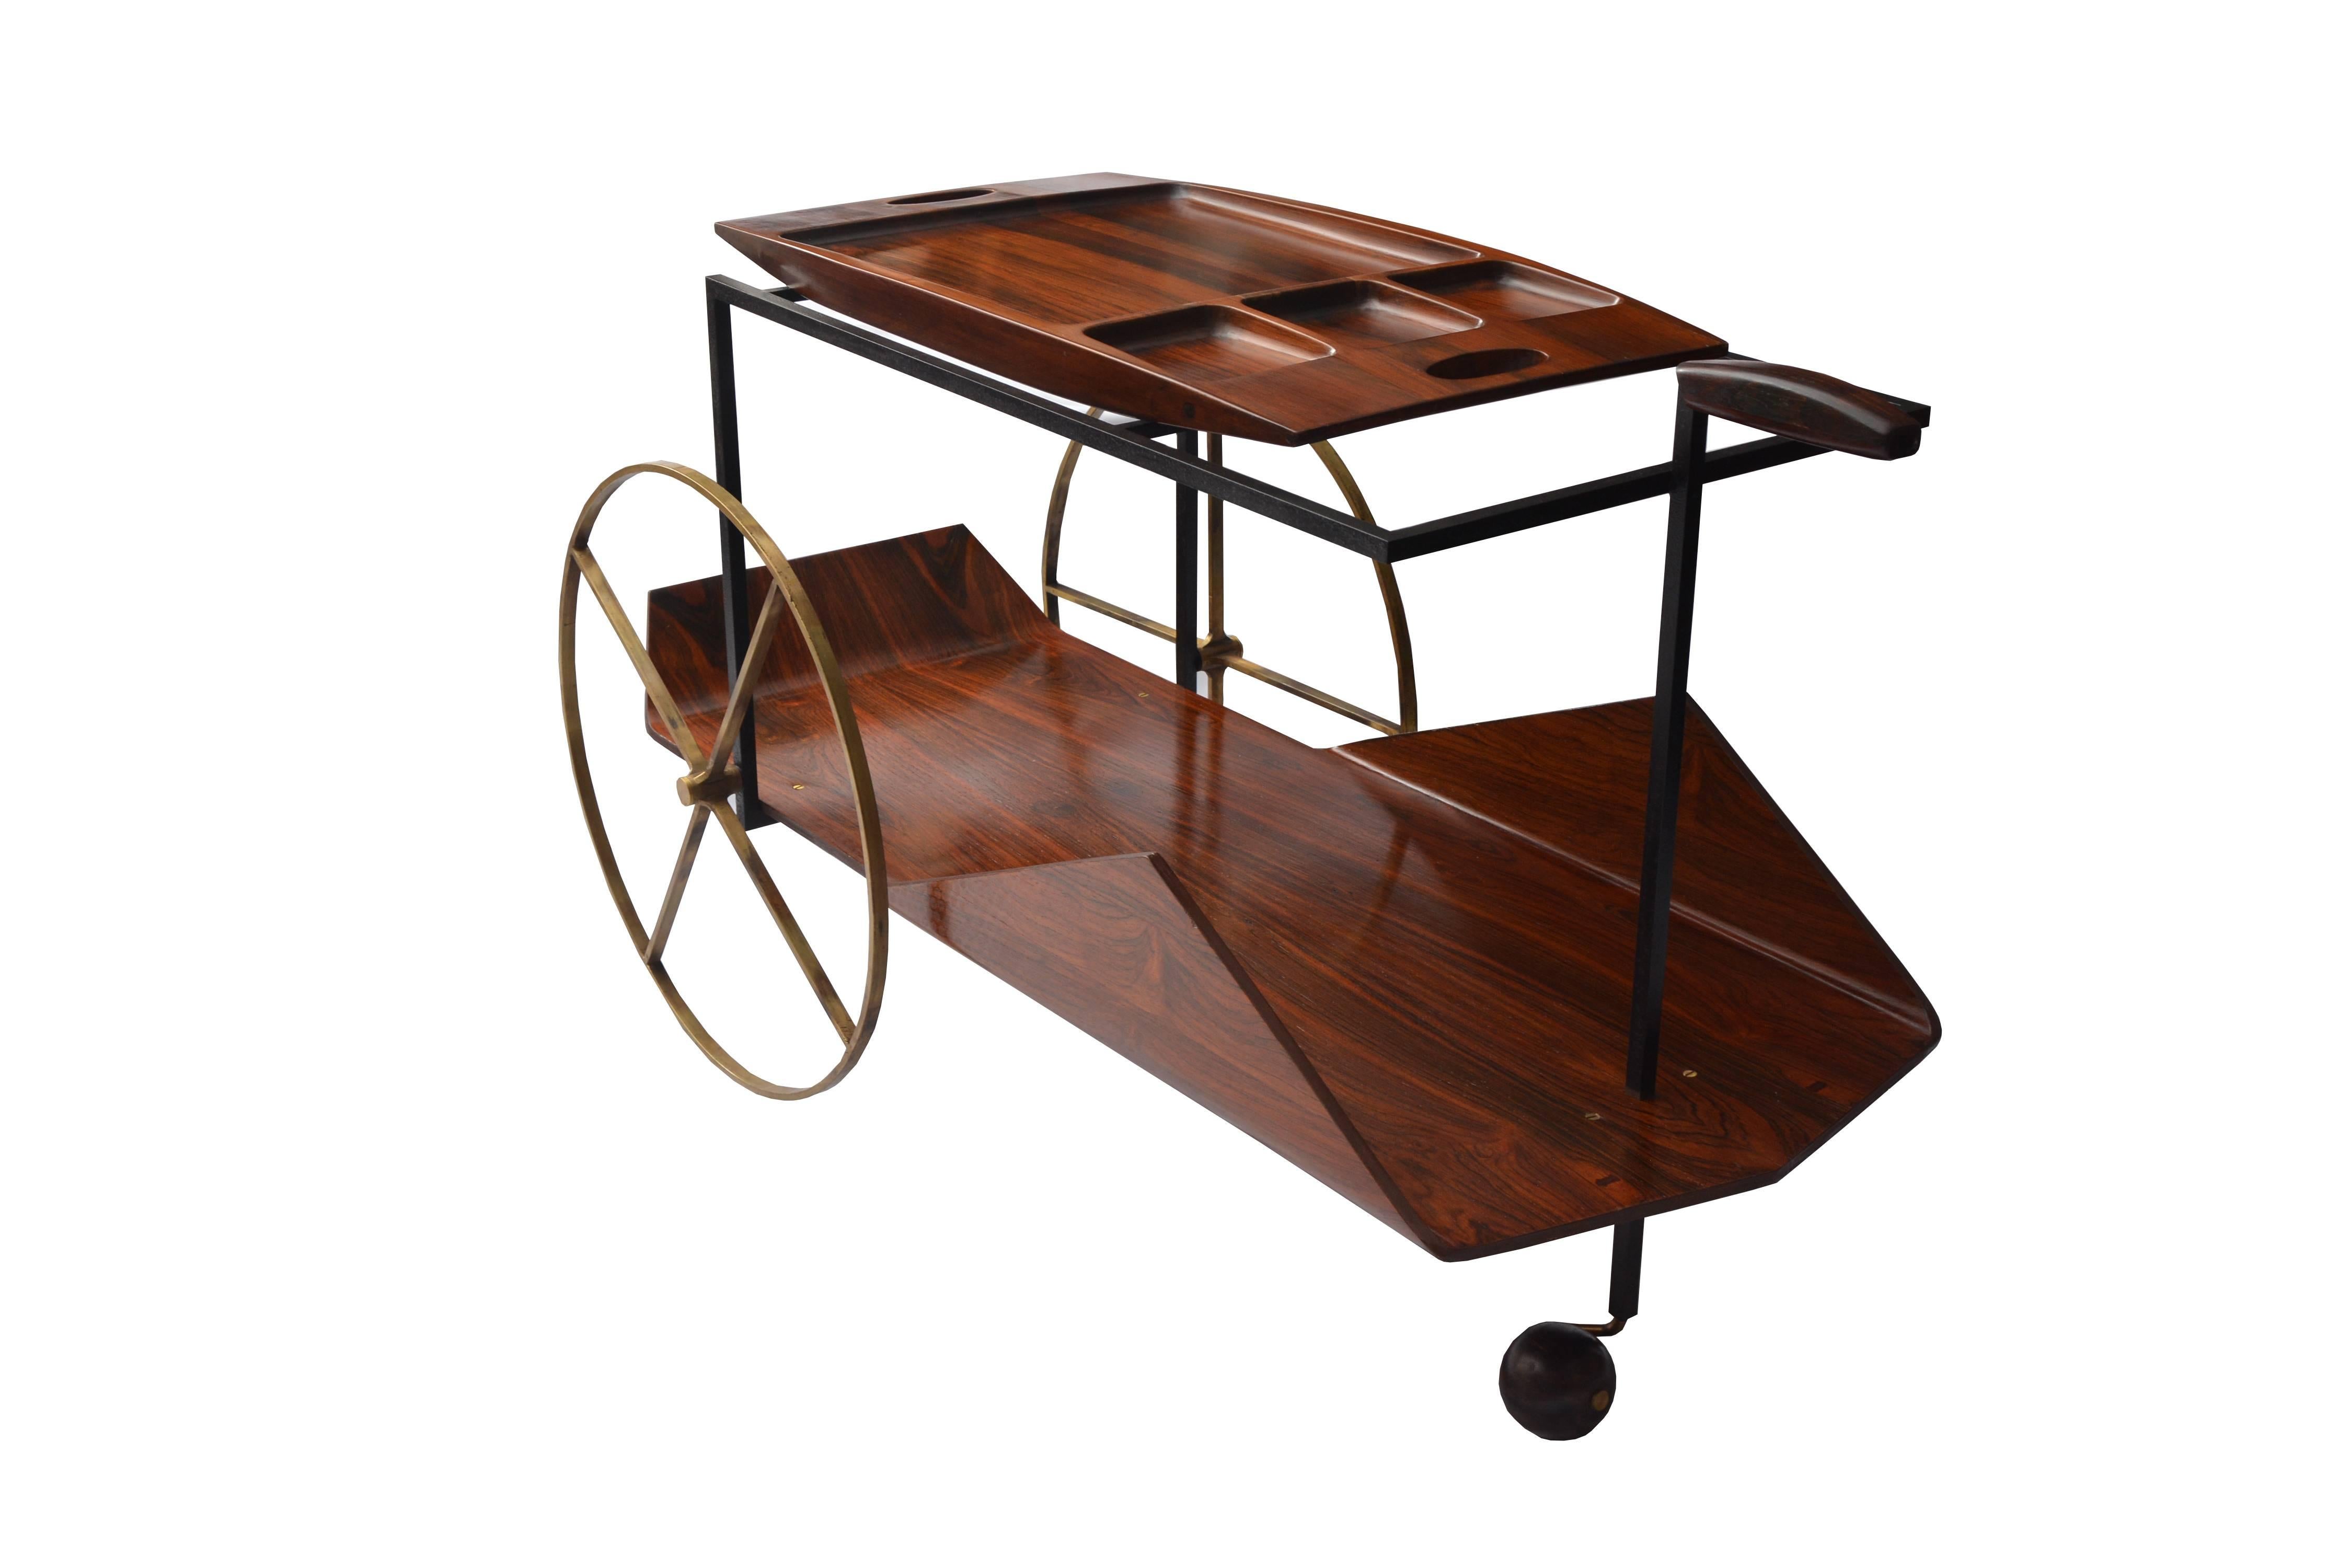 Jorge Zalszupin’s exquisite 1950s tea trolley, bar, made in Brazilian jacaranda with brass wheels and ball foot. The top shelf is a removable tray.